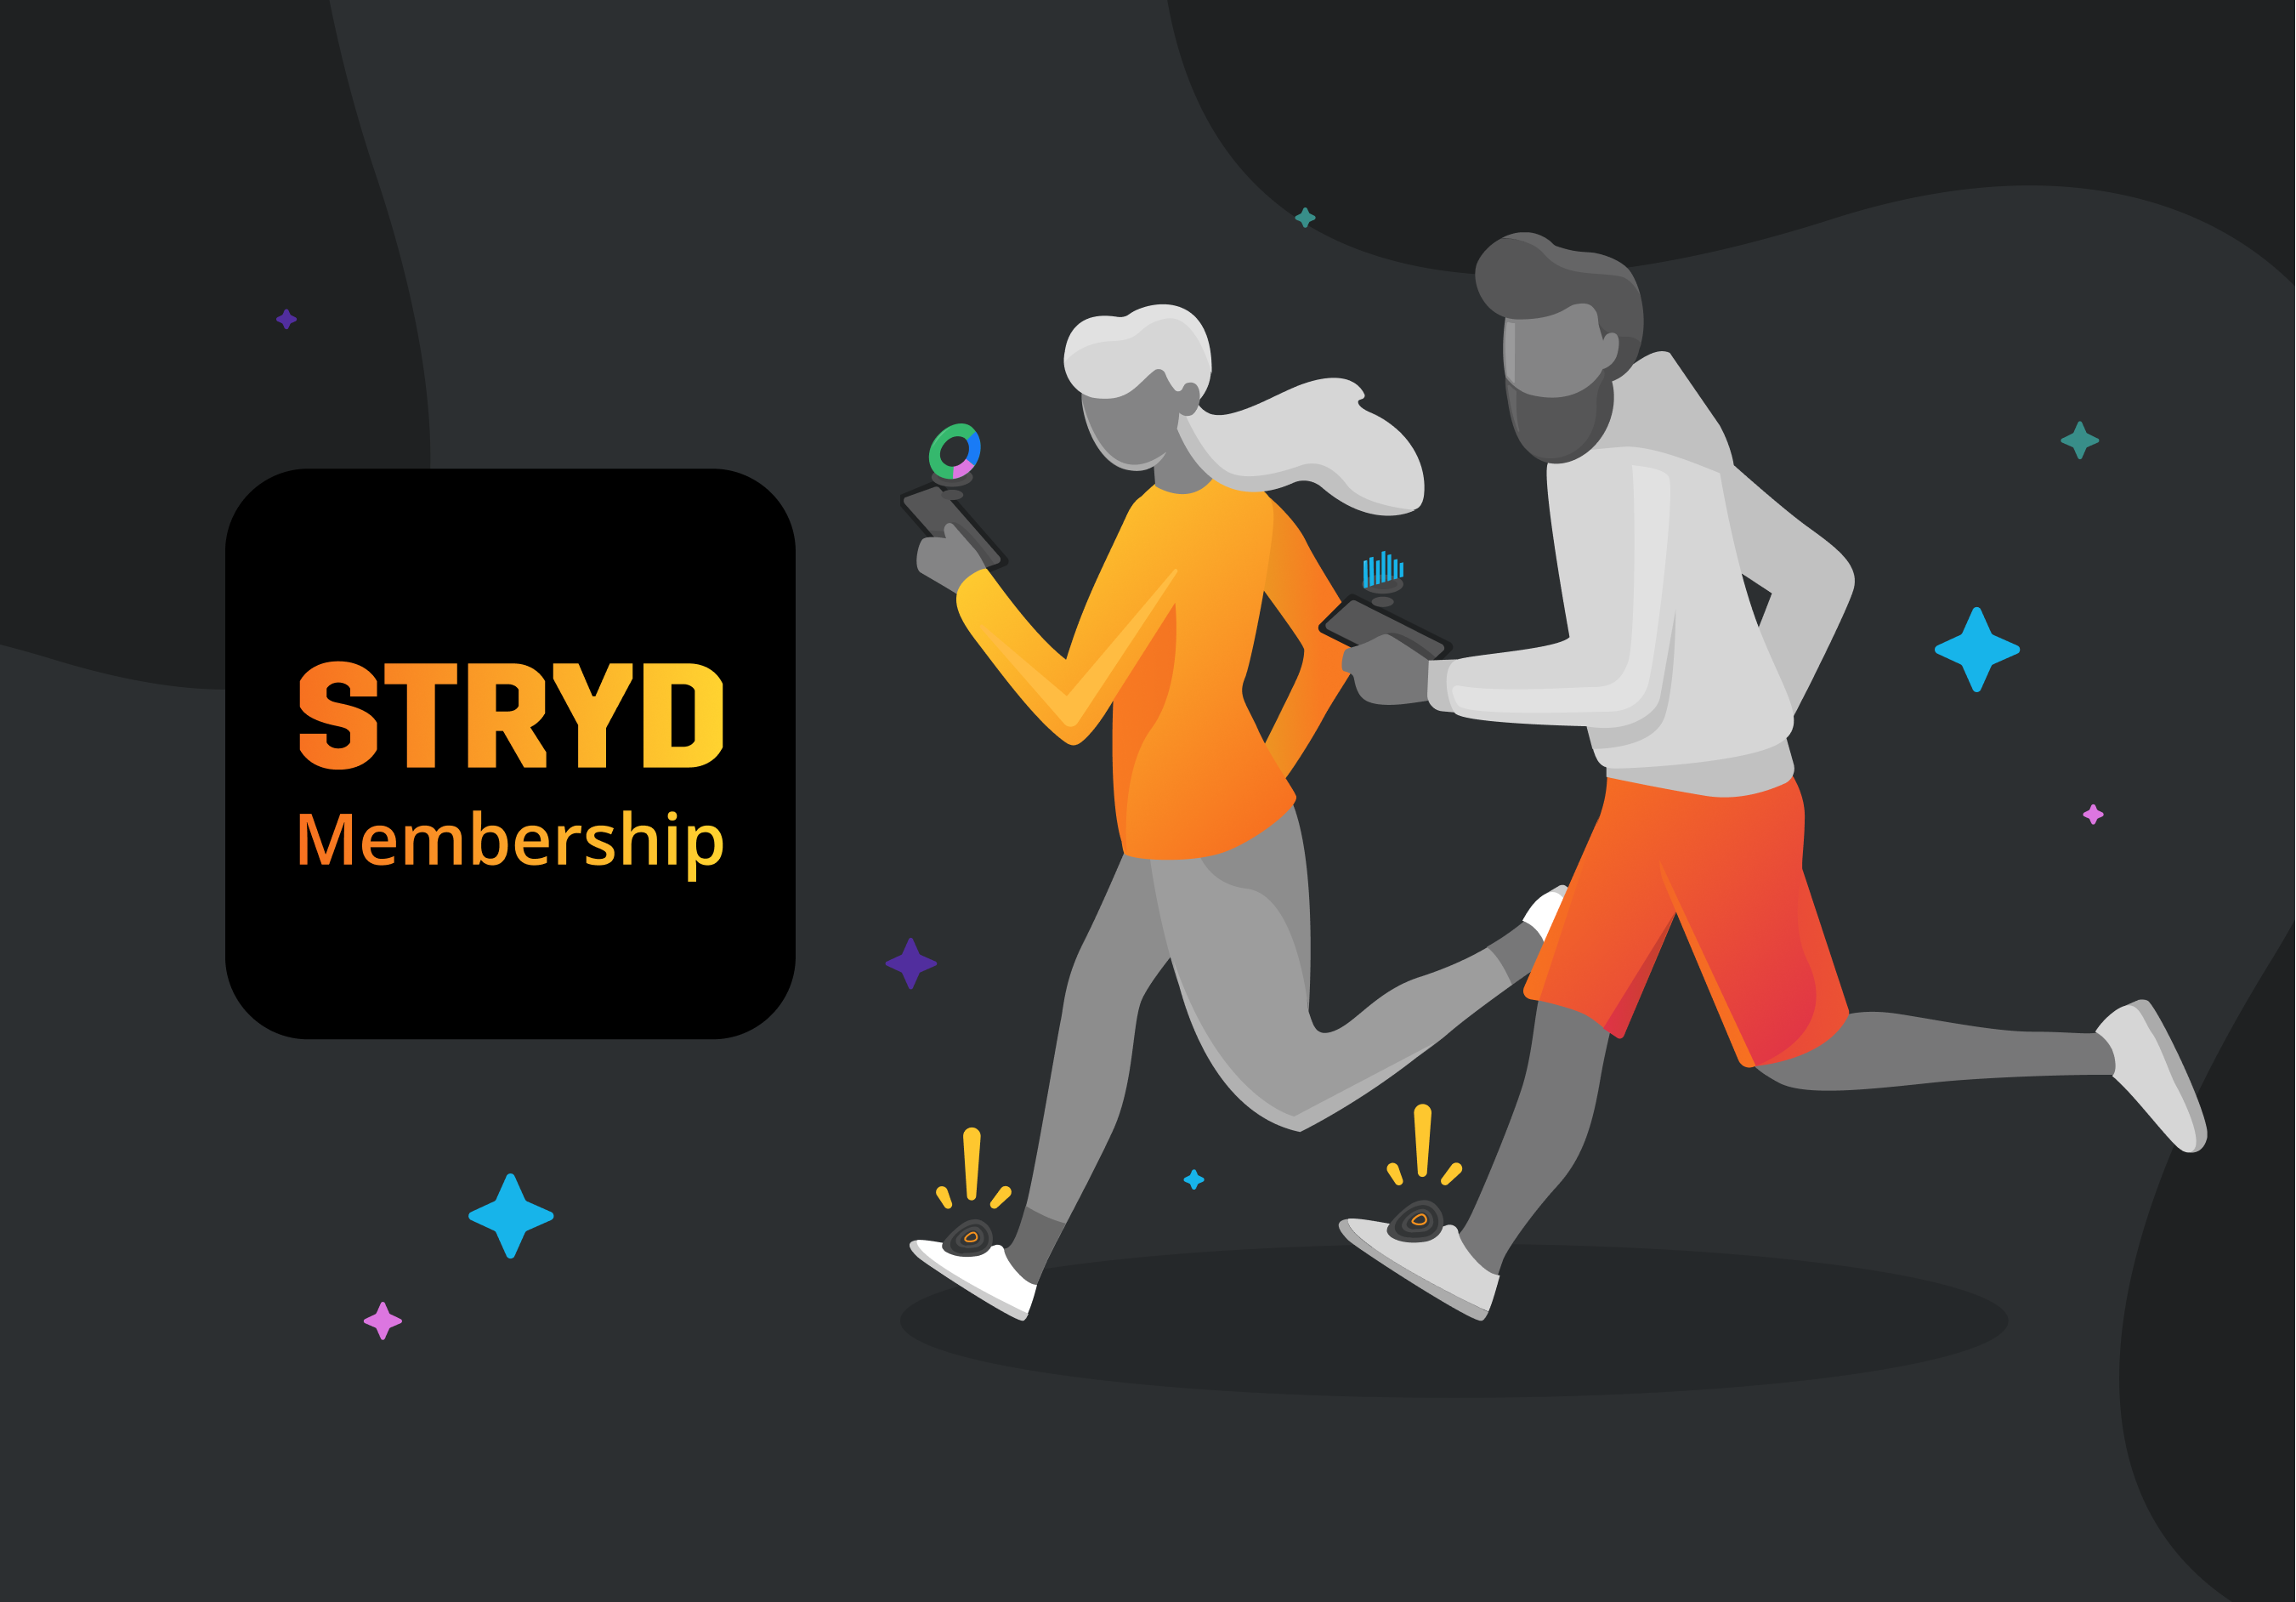 Stryd Membership is here: New features & more.